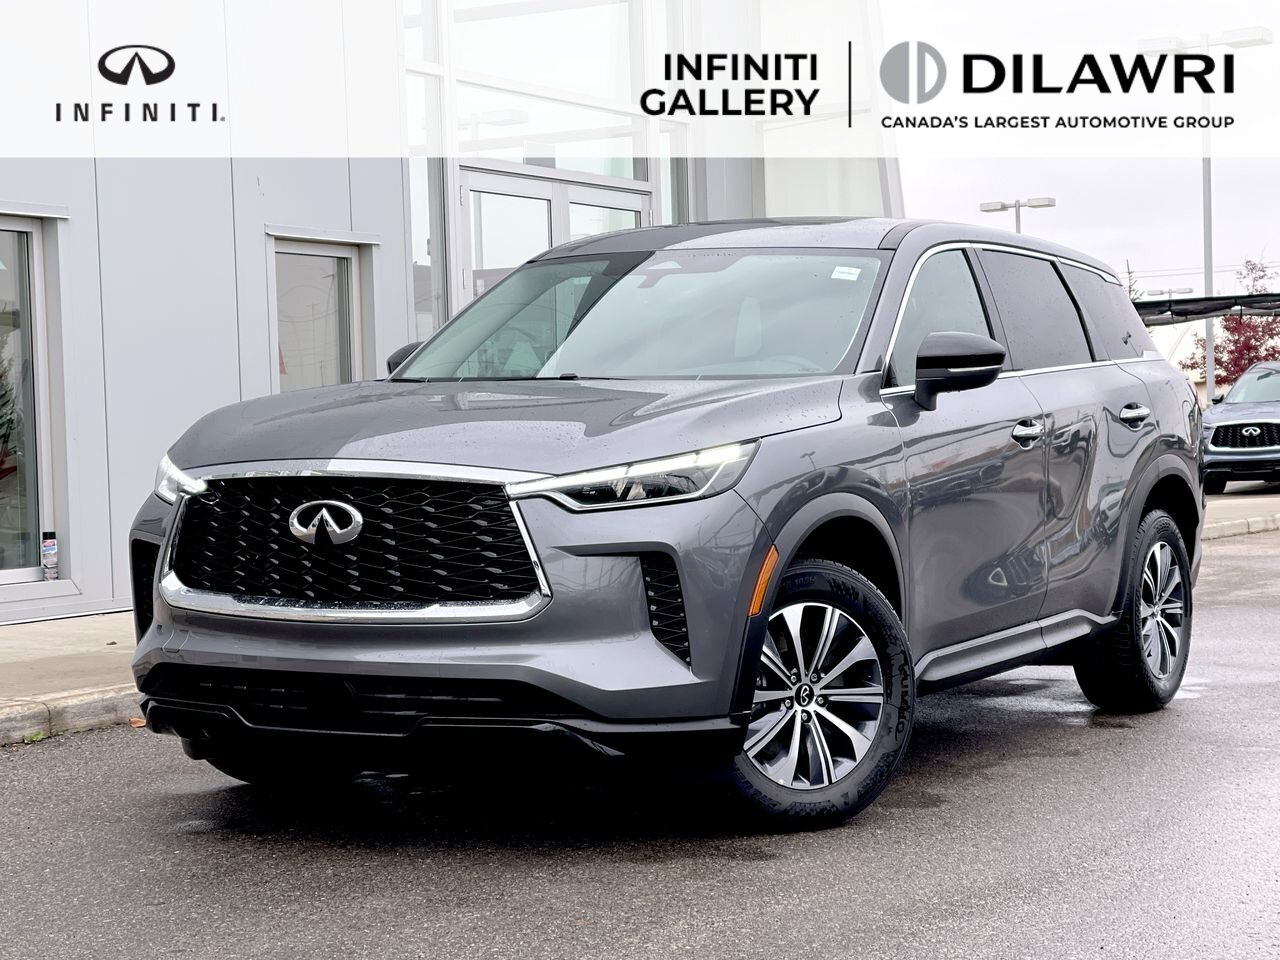 2023 Infiniti QX60 PURE Model Year Clearance - Save Thousands!